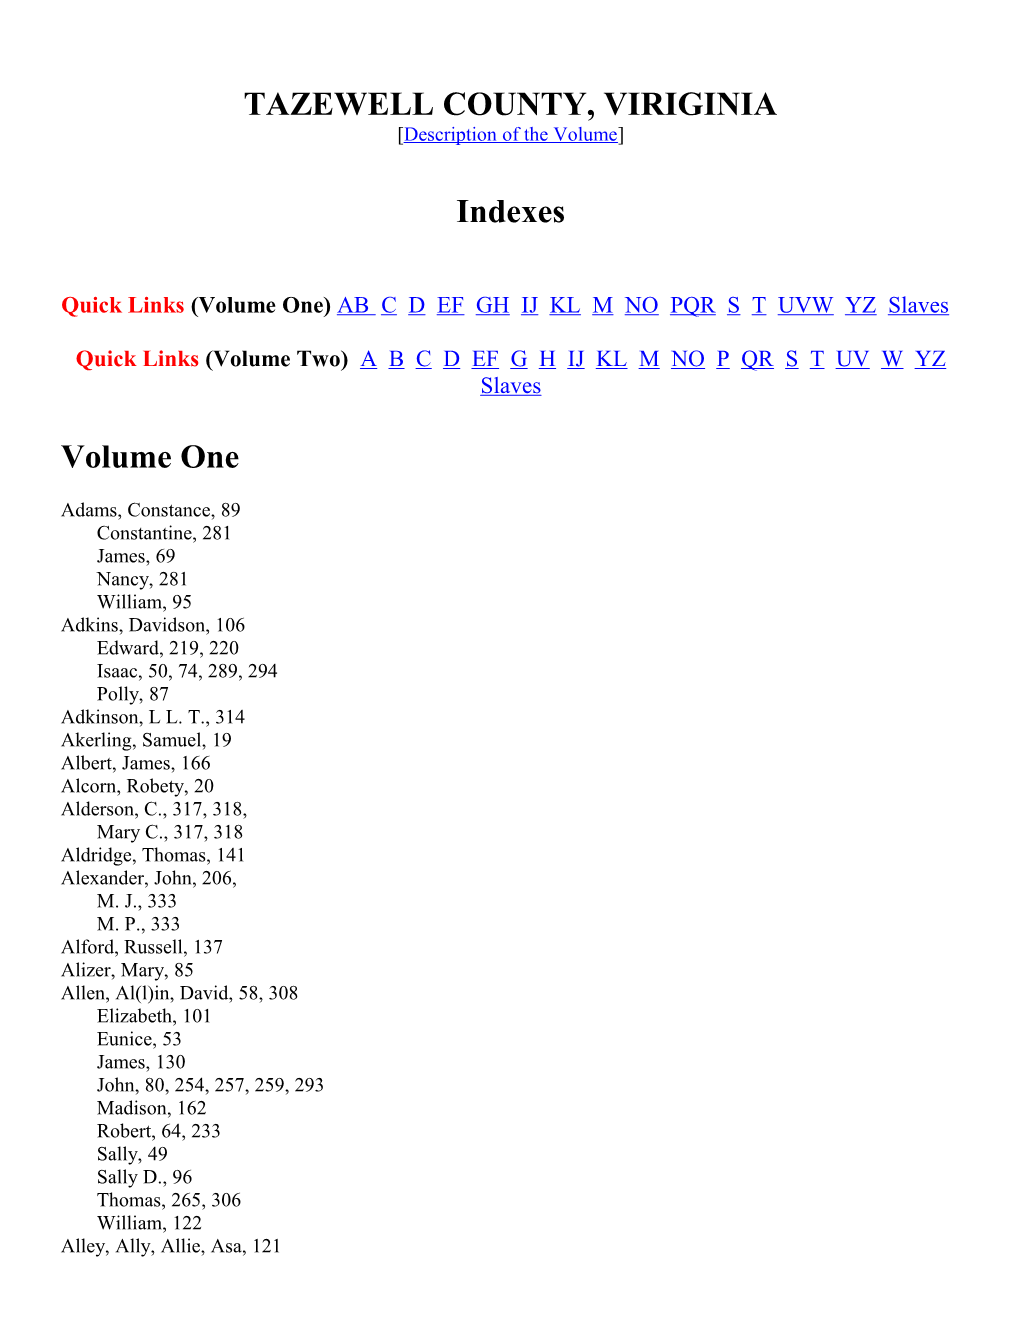 Index to Both Volumes